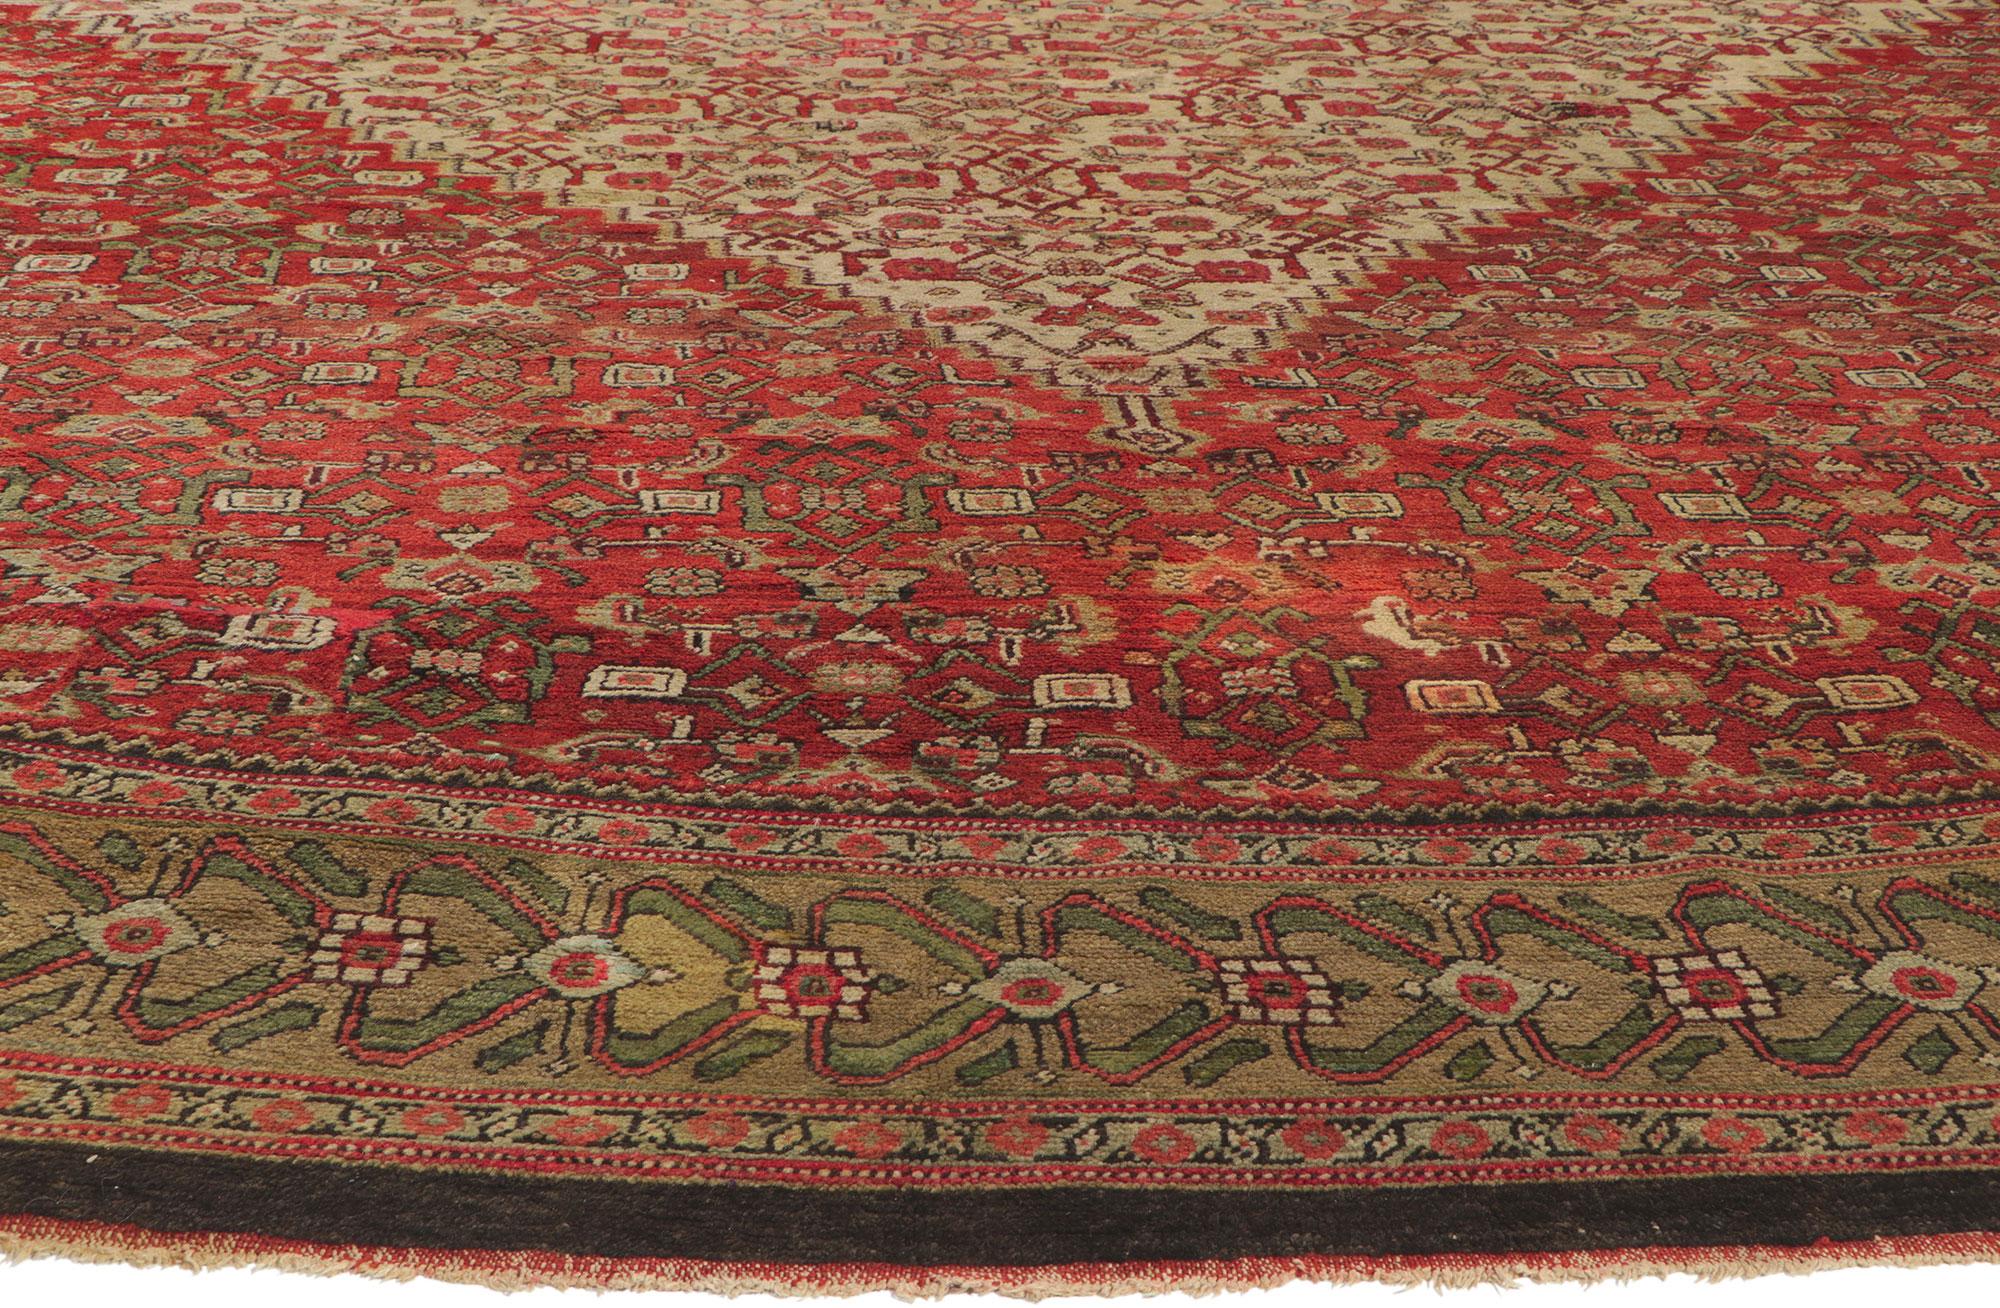 Oversized Round Antique Persian Sultanabad Rug, Hotel Lobby Size Carpet In Good Condition For Sale In Dallas, TX